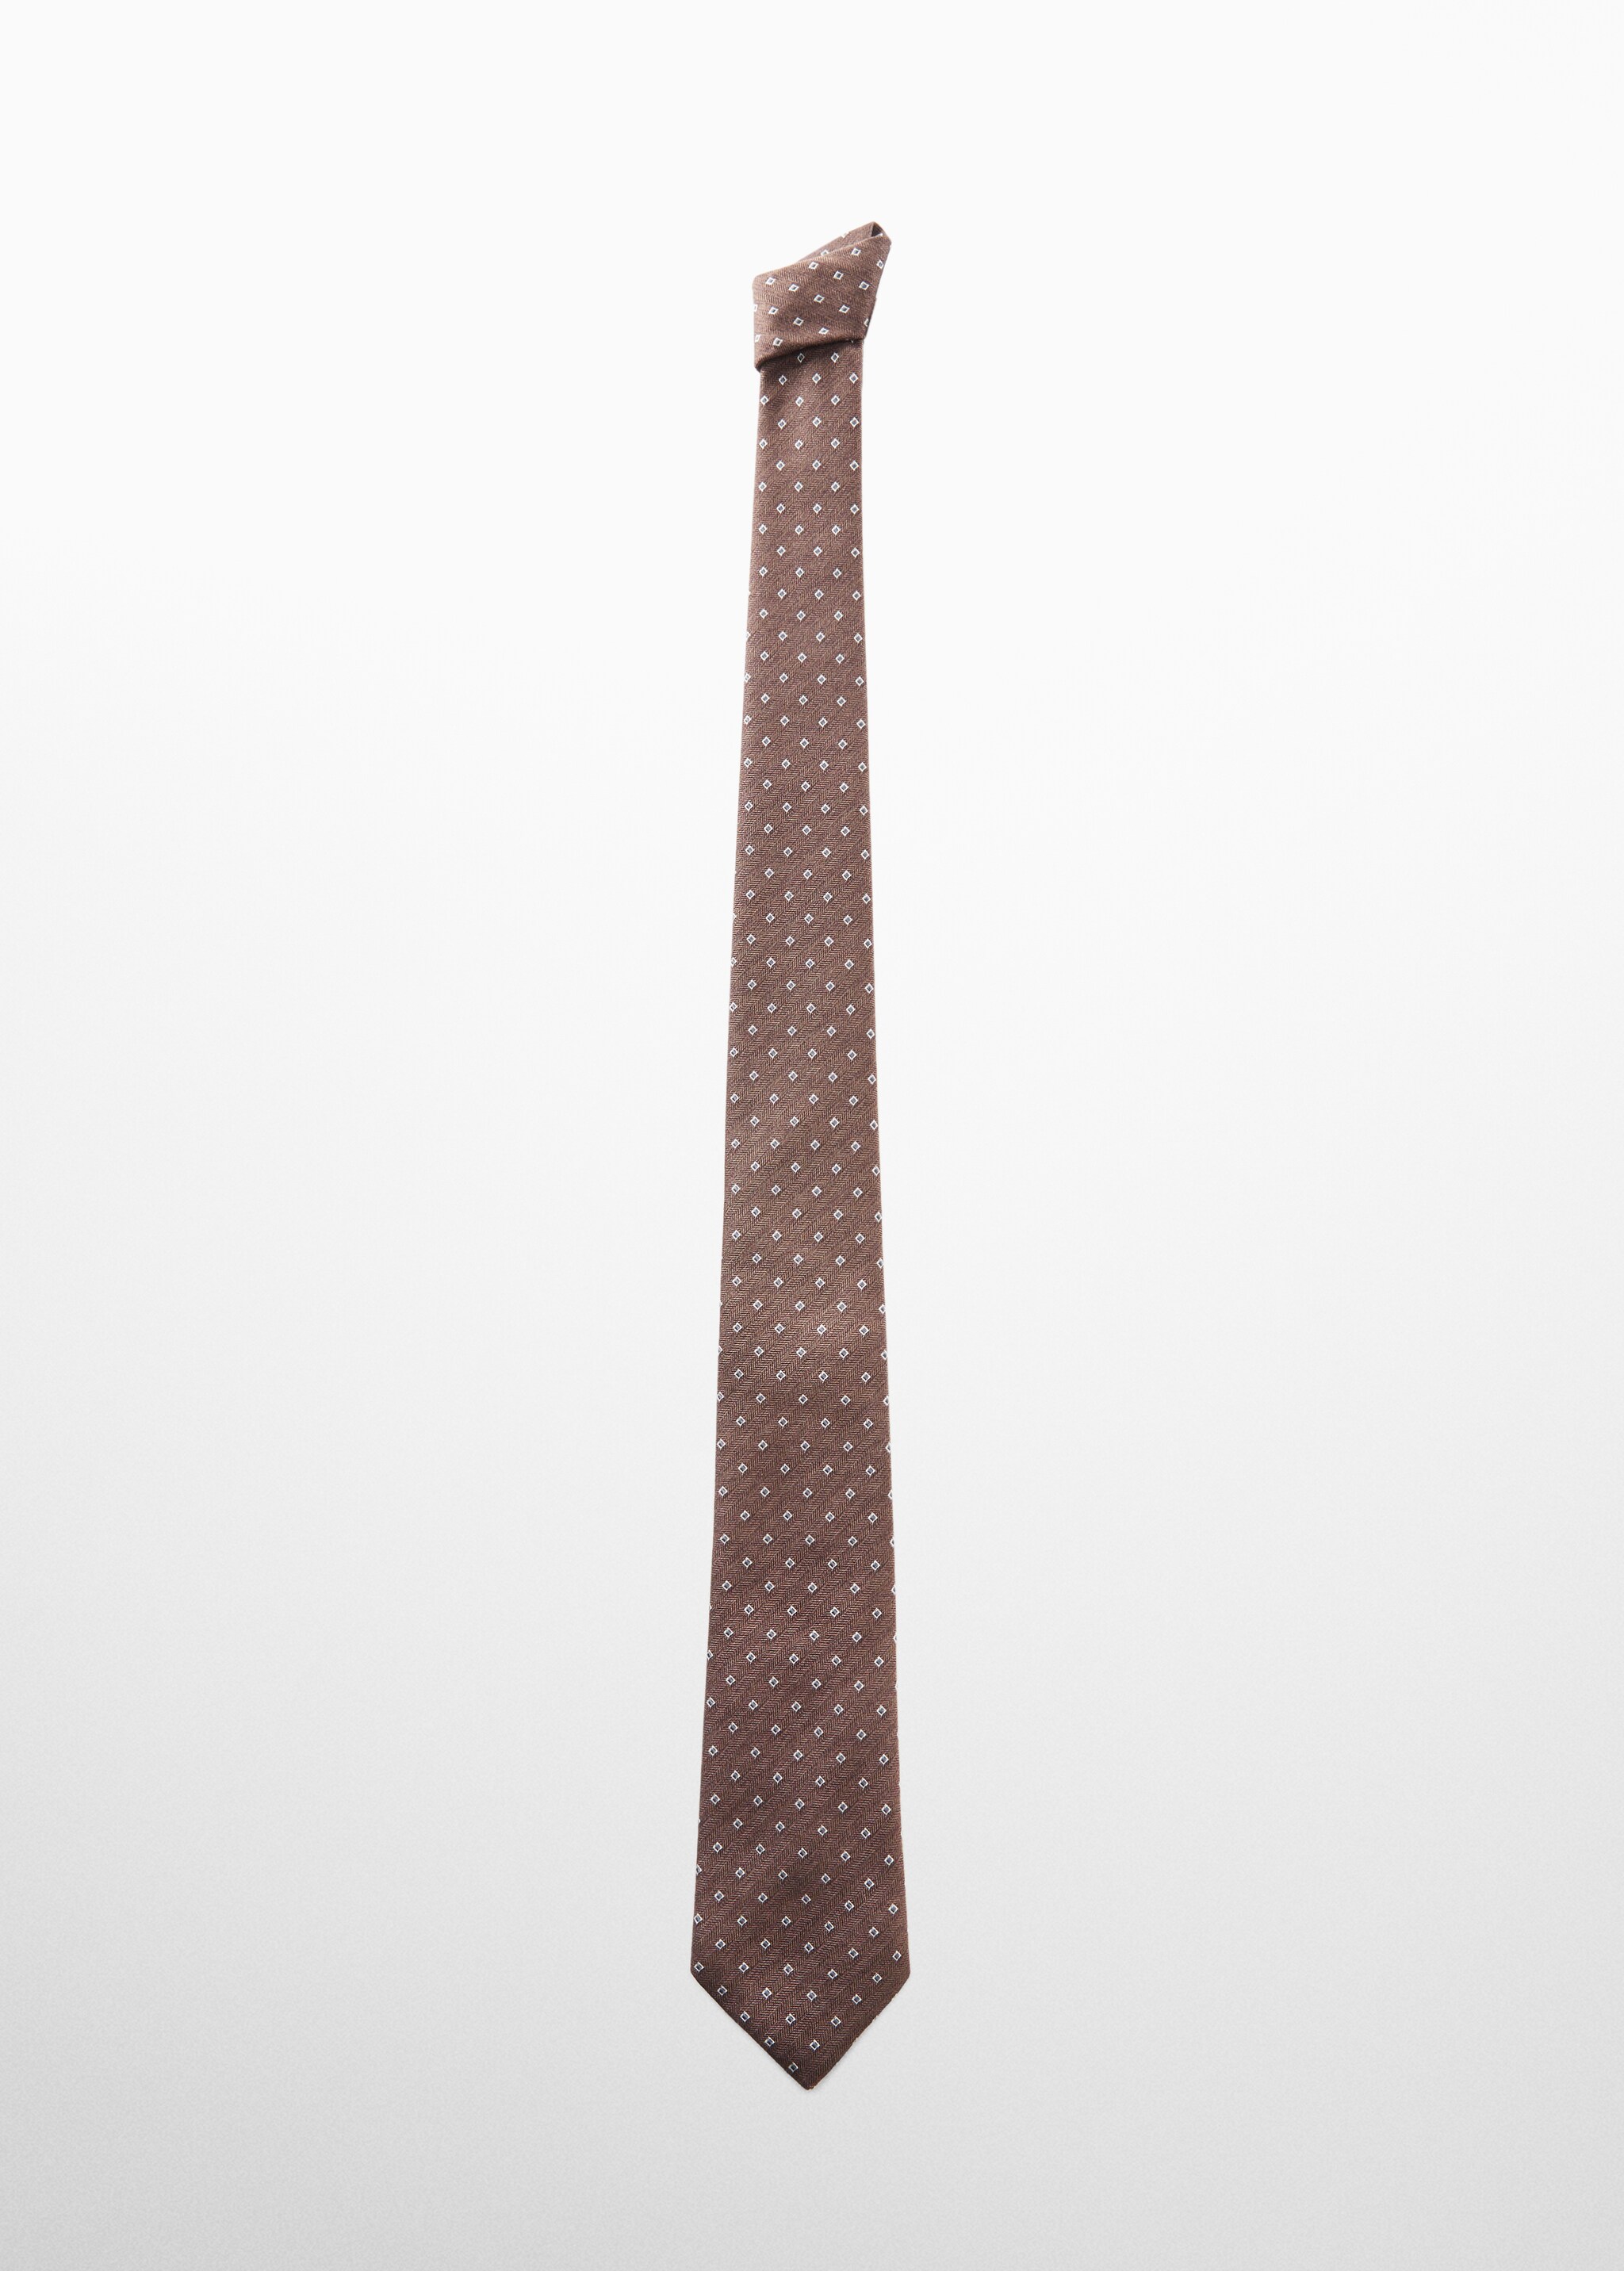 Geometric print tie - Article without model